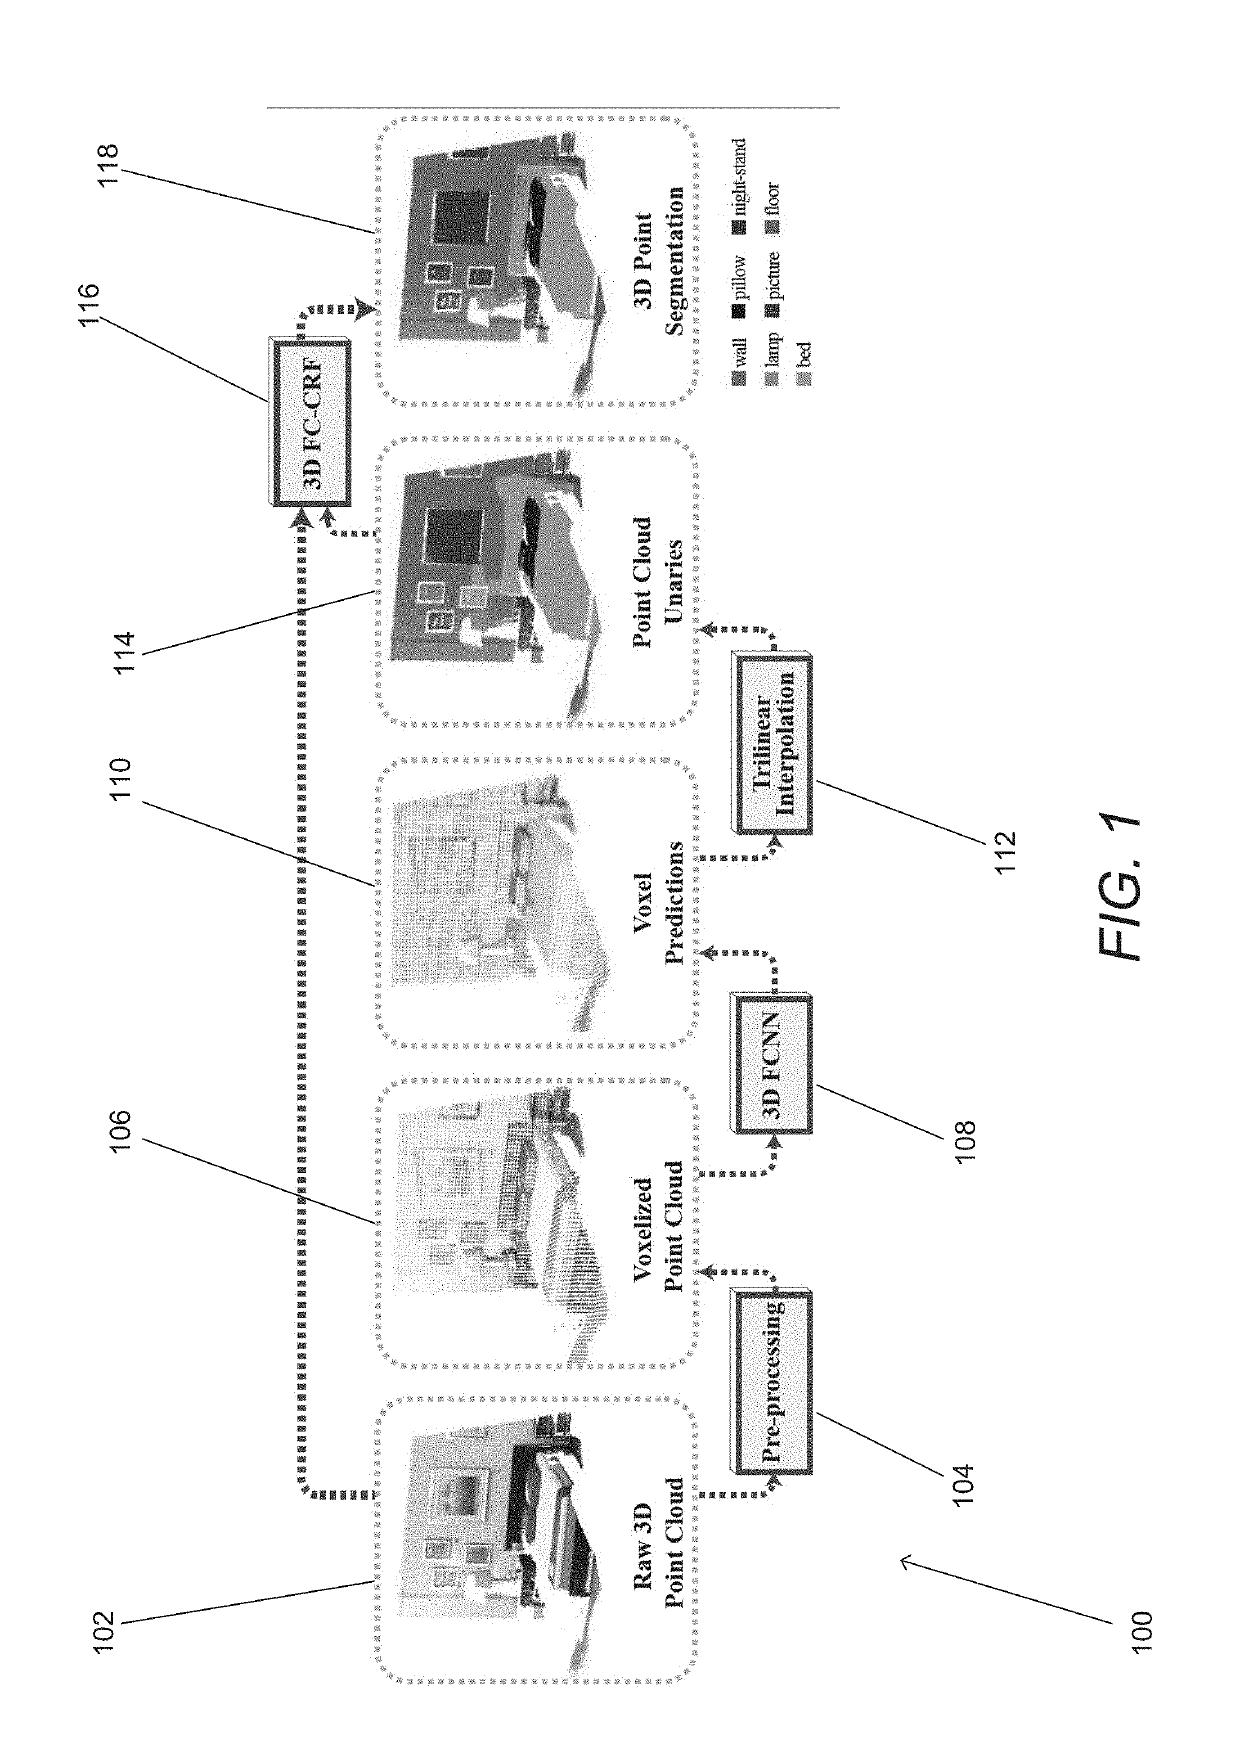 Systems and Methods for Semantic Segmentation of 3D Point Clouds